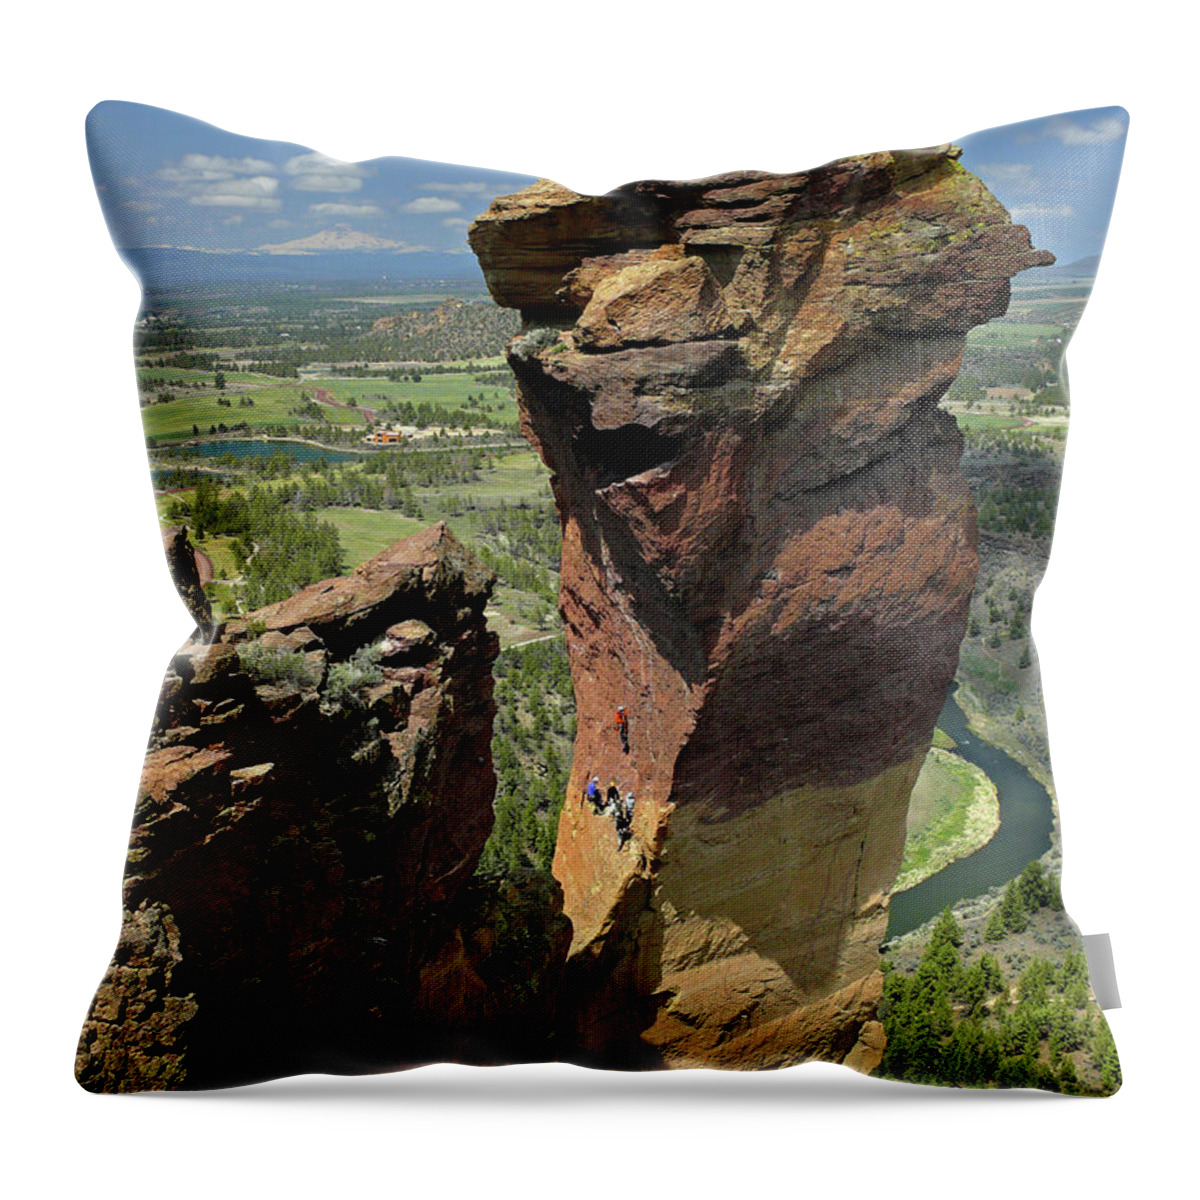 Dm5314 Throw Pillow featuring the photograph DM5314 Climbers on Monkey Face Rock OR by Ed Cooper Photography